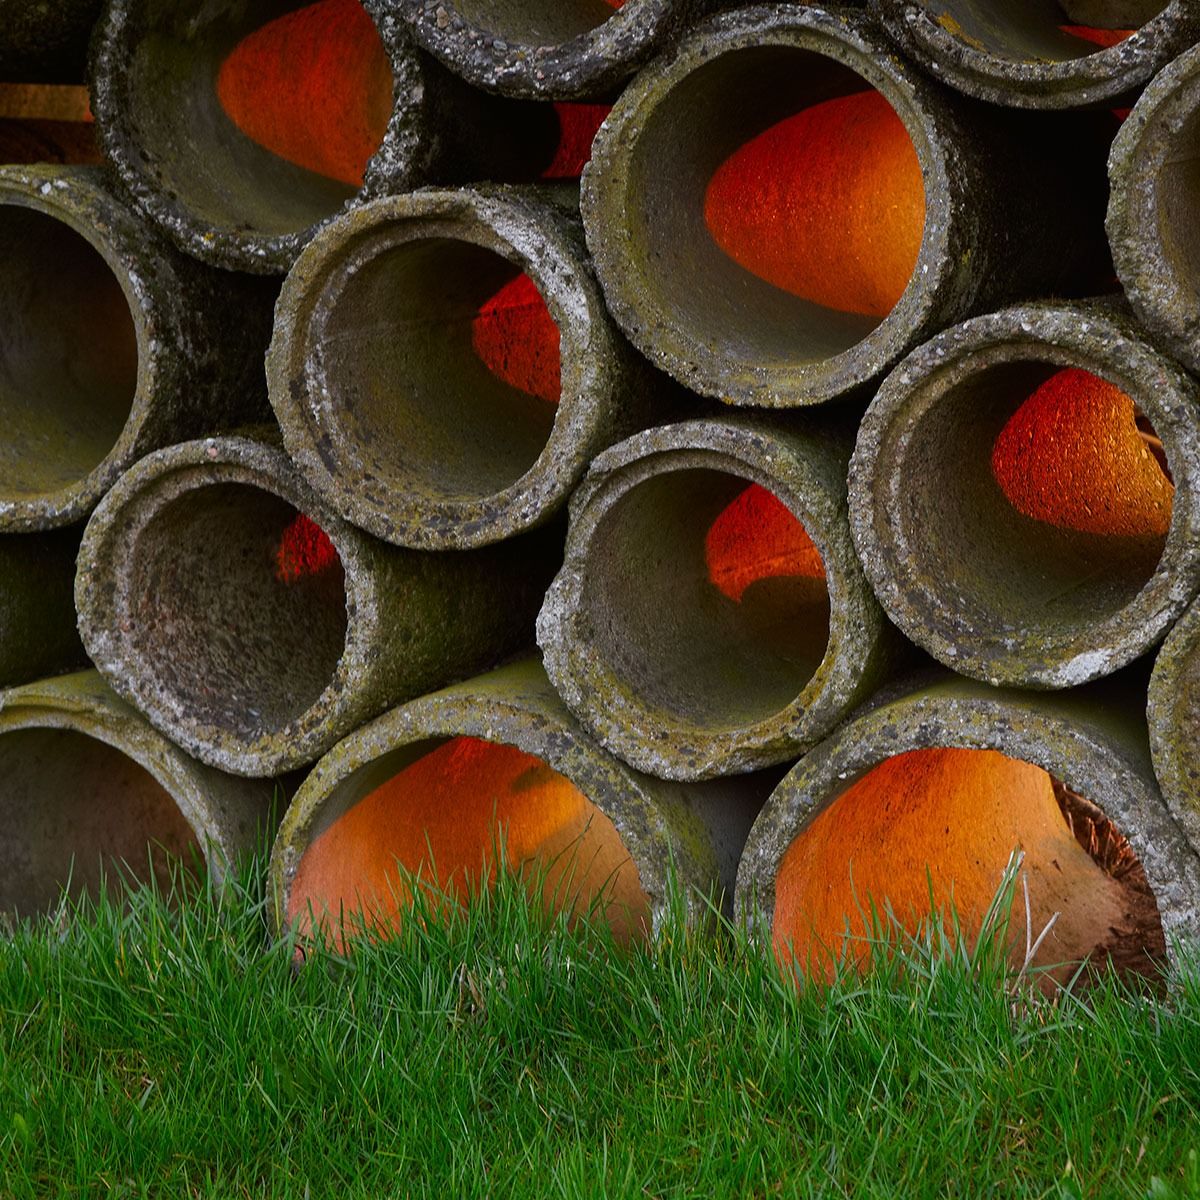 Abbiategrasso: Luggage concrete pipes at sunset...